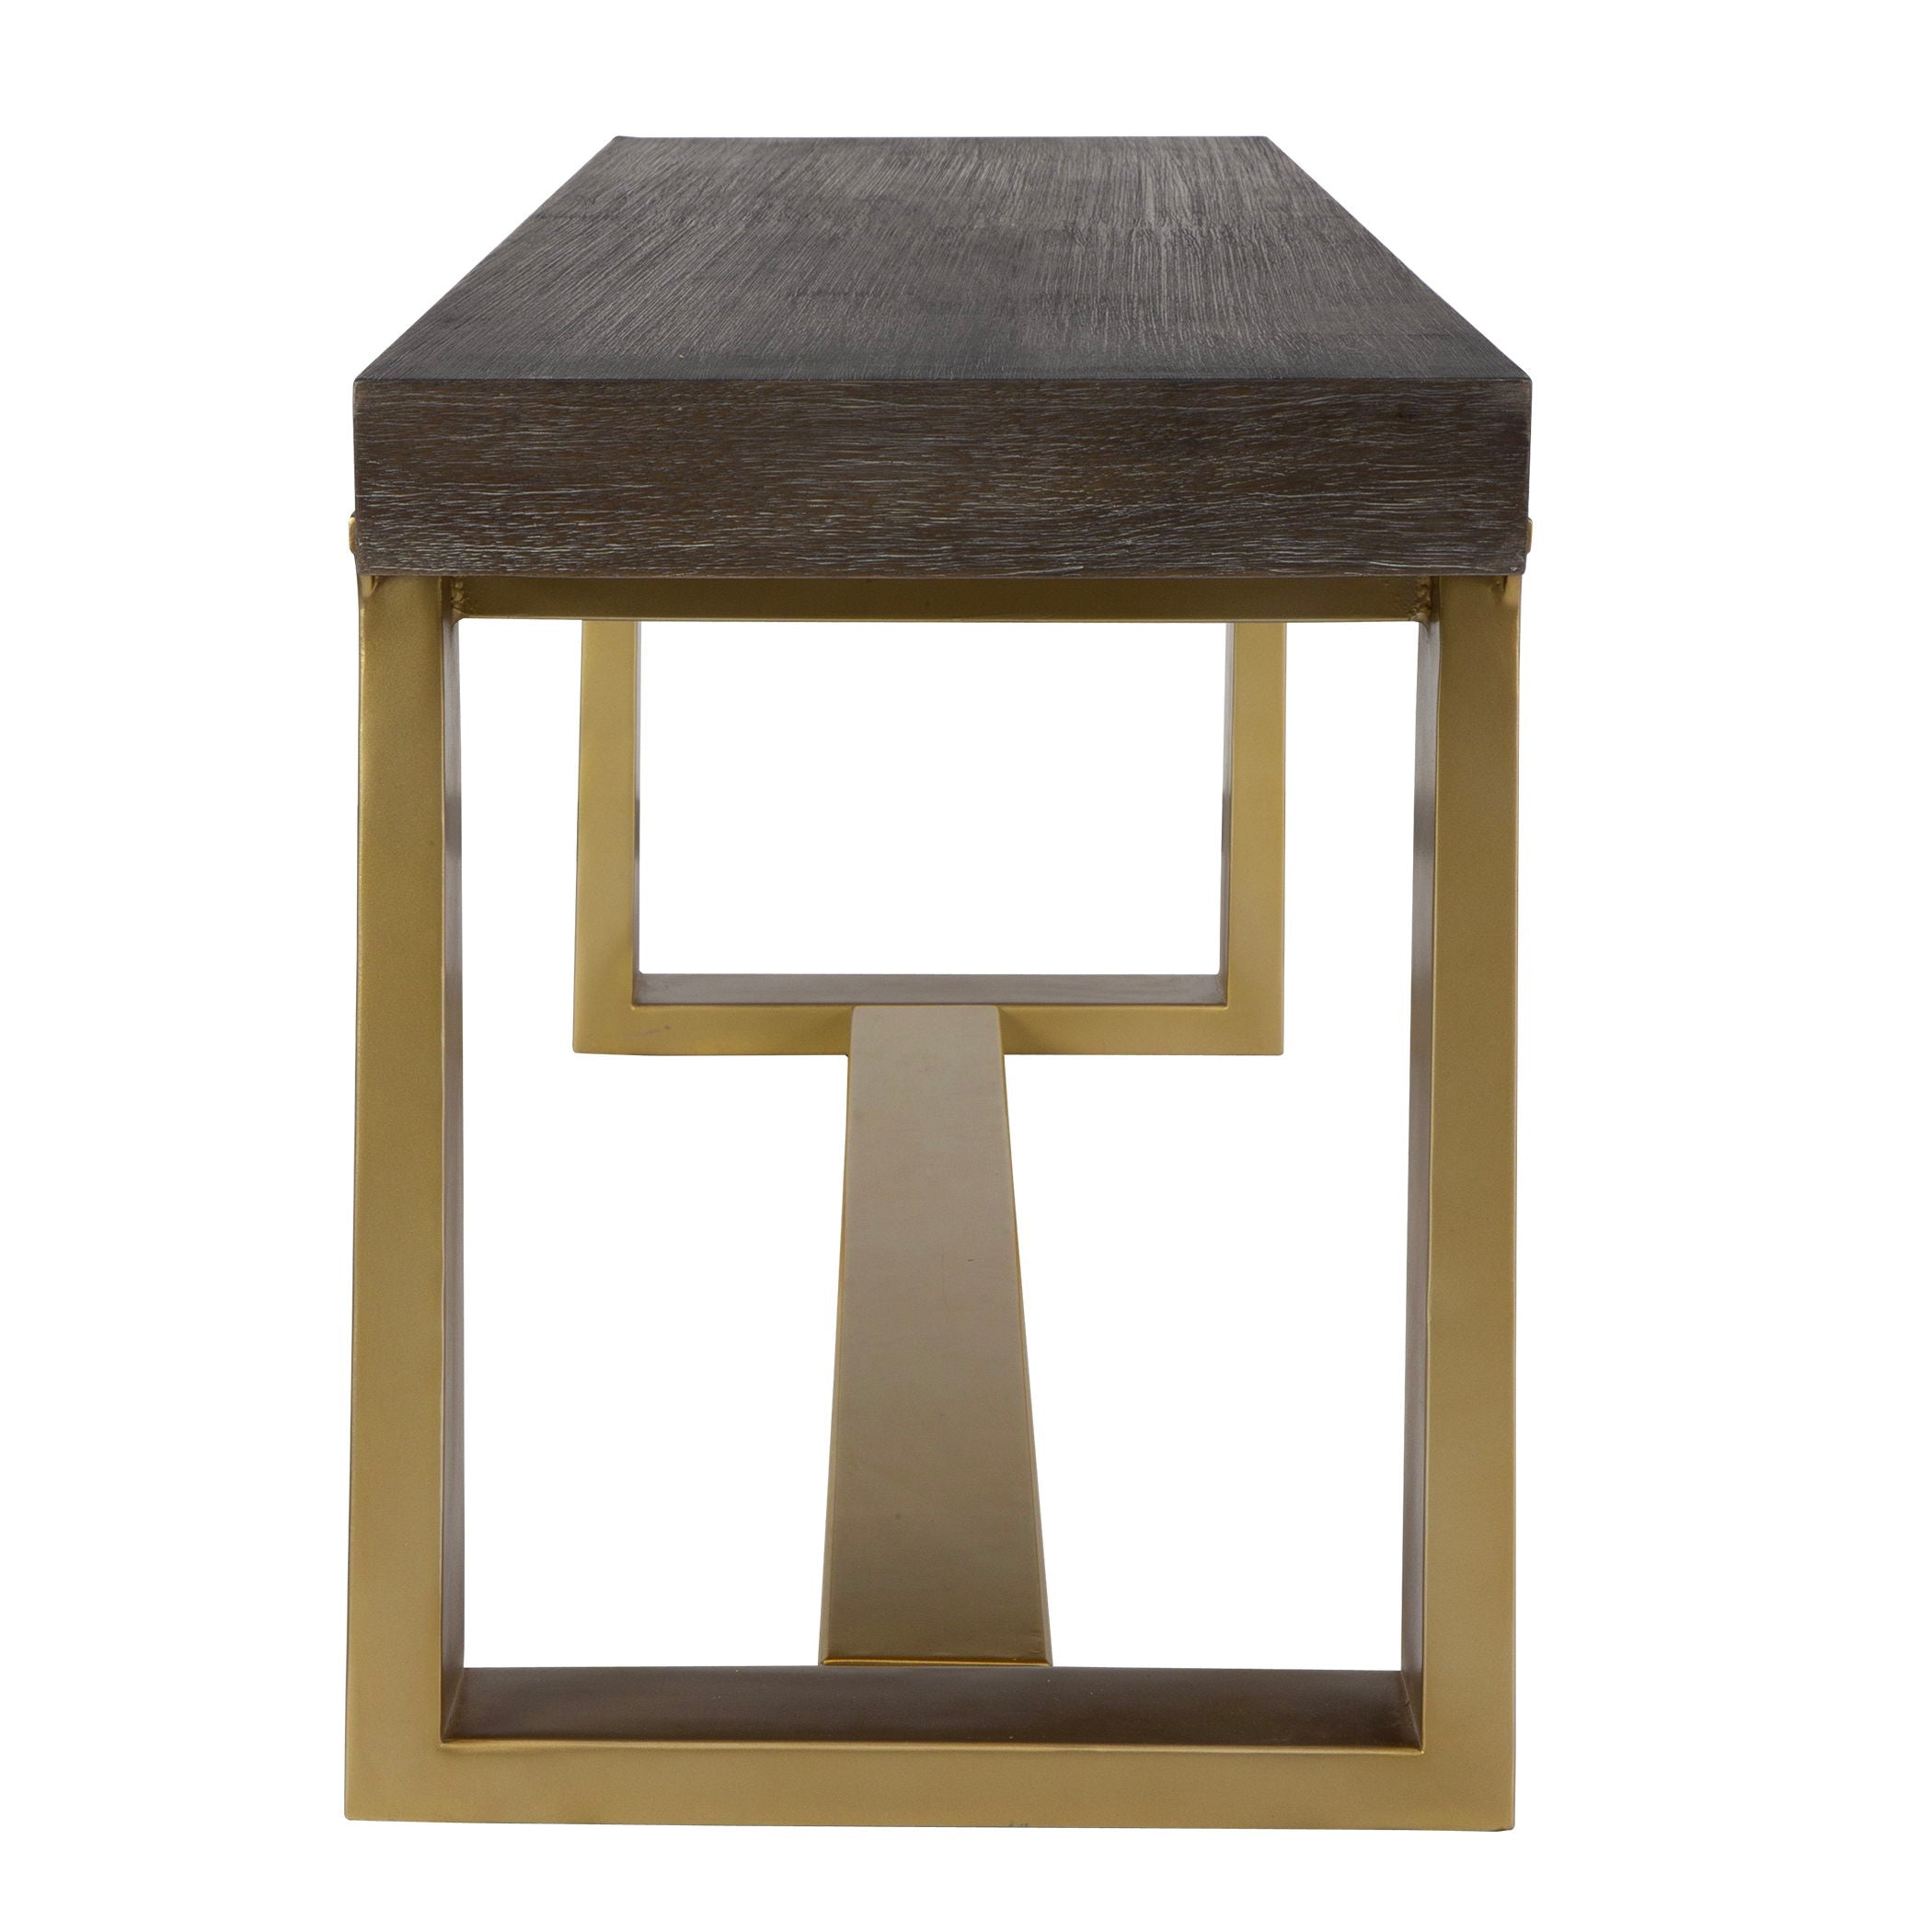 Voyage - Brass And Wood Bench - Gold